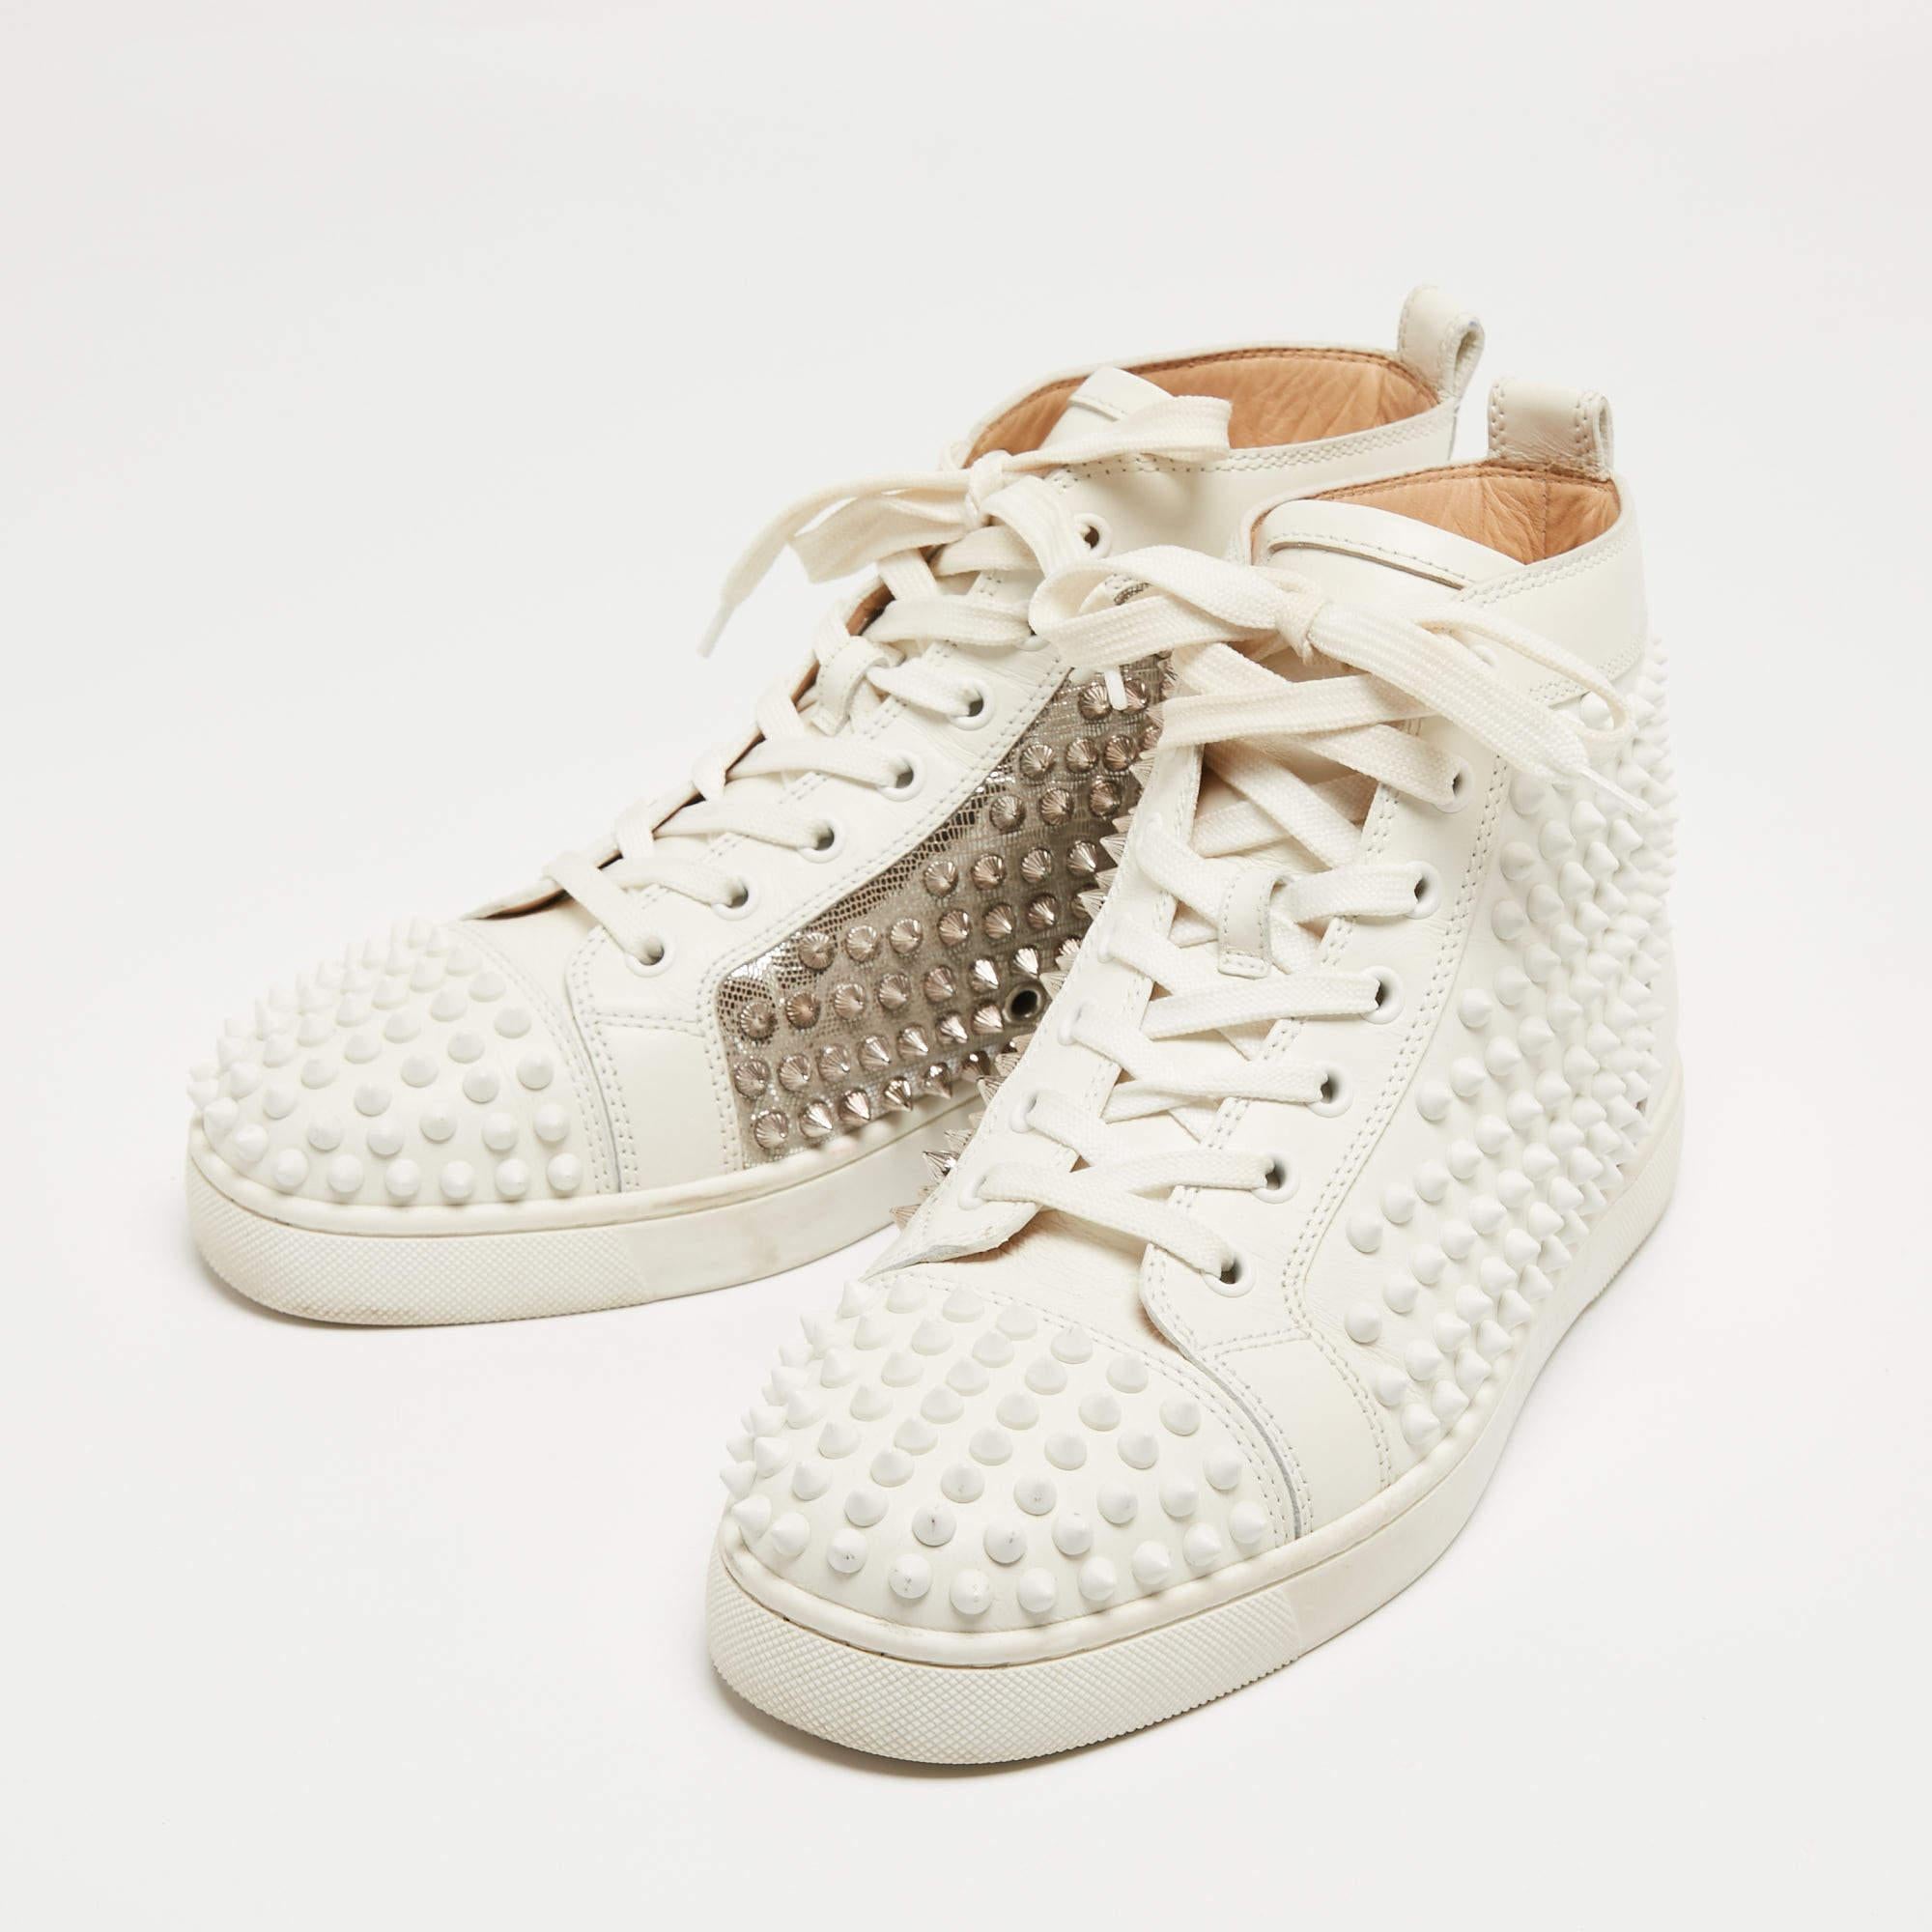 Christian Louboutin White Leather Louis Spikes High Top Sneakers Size 39 For Sale 2